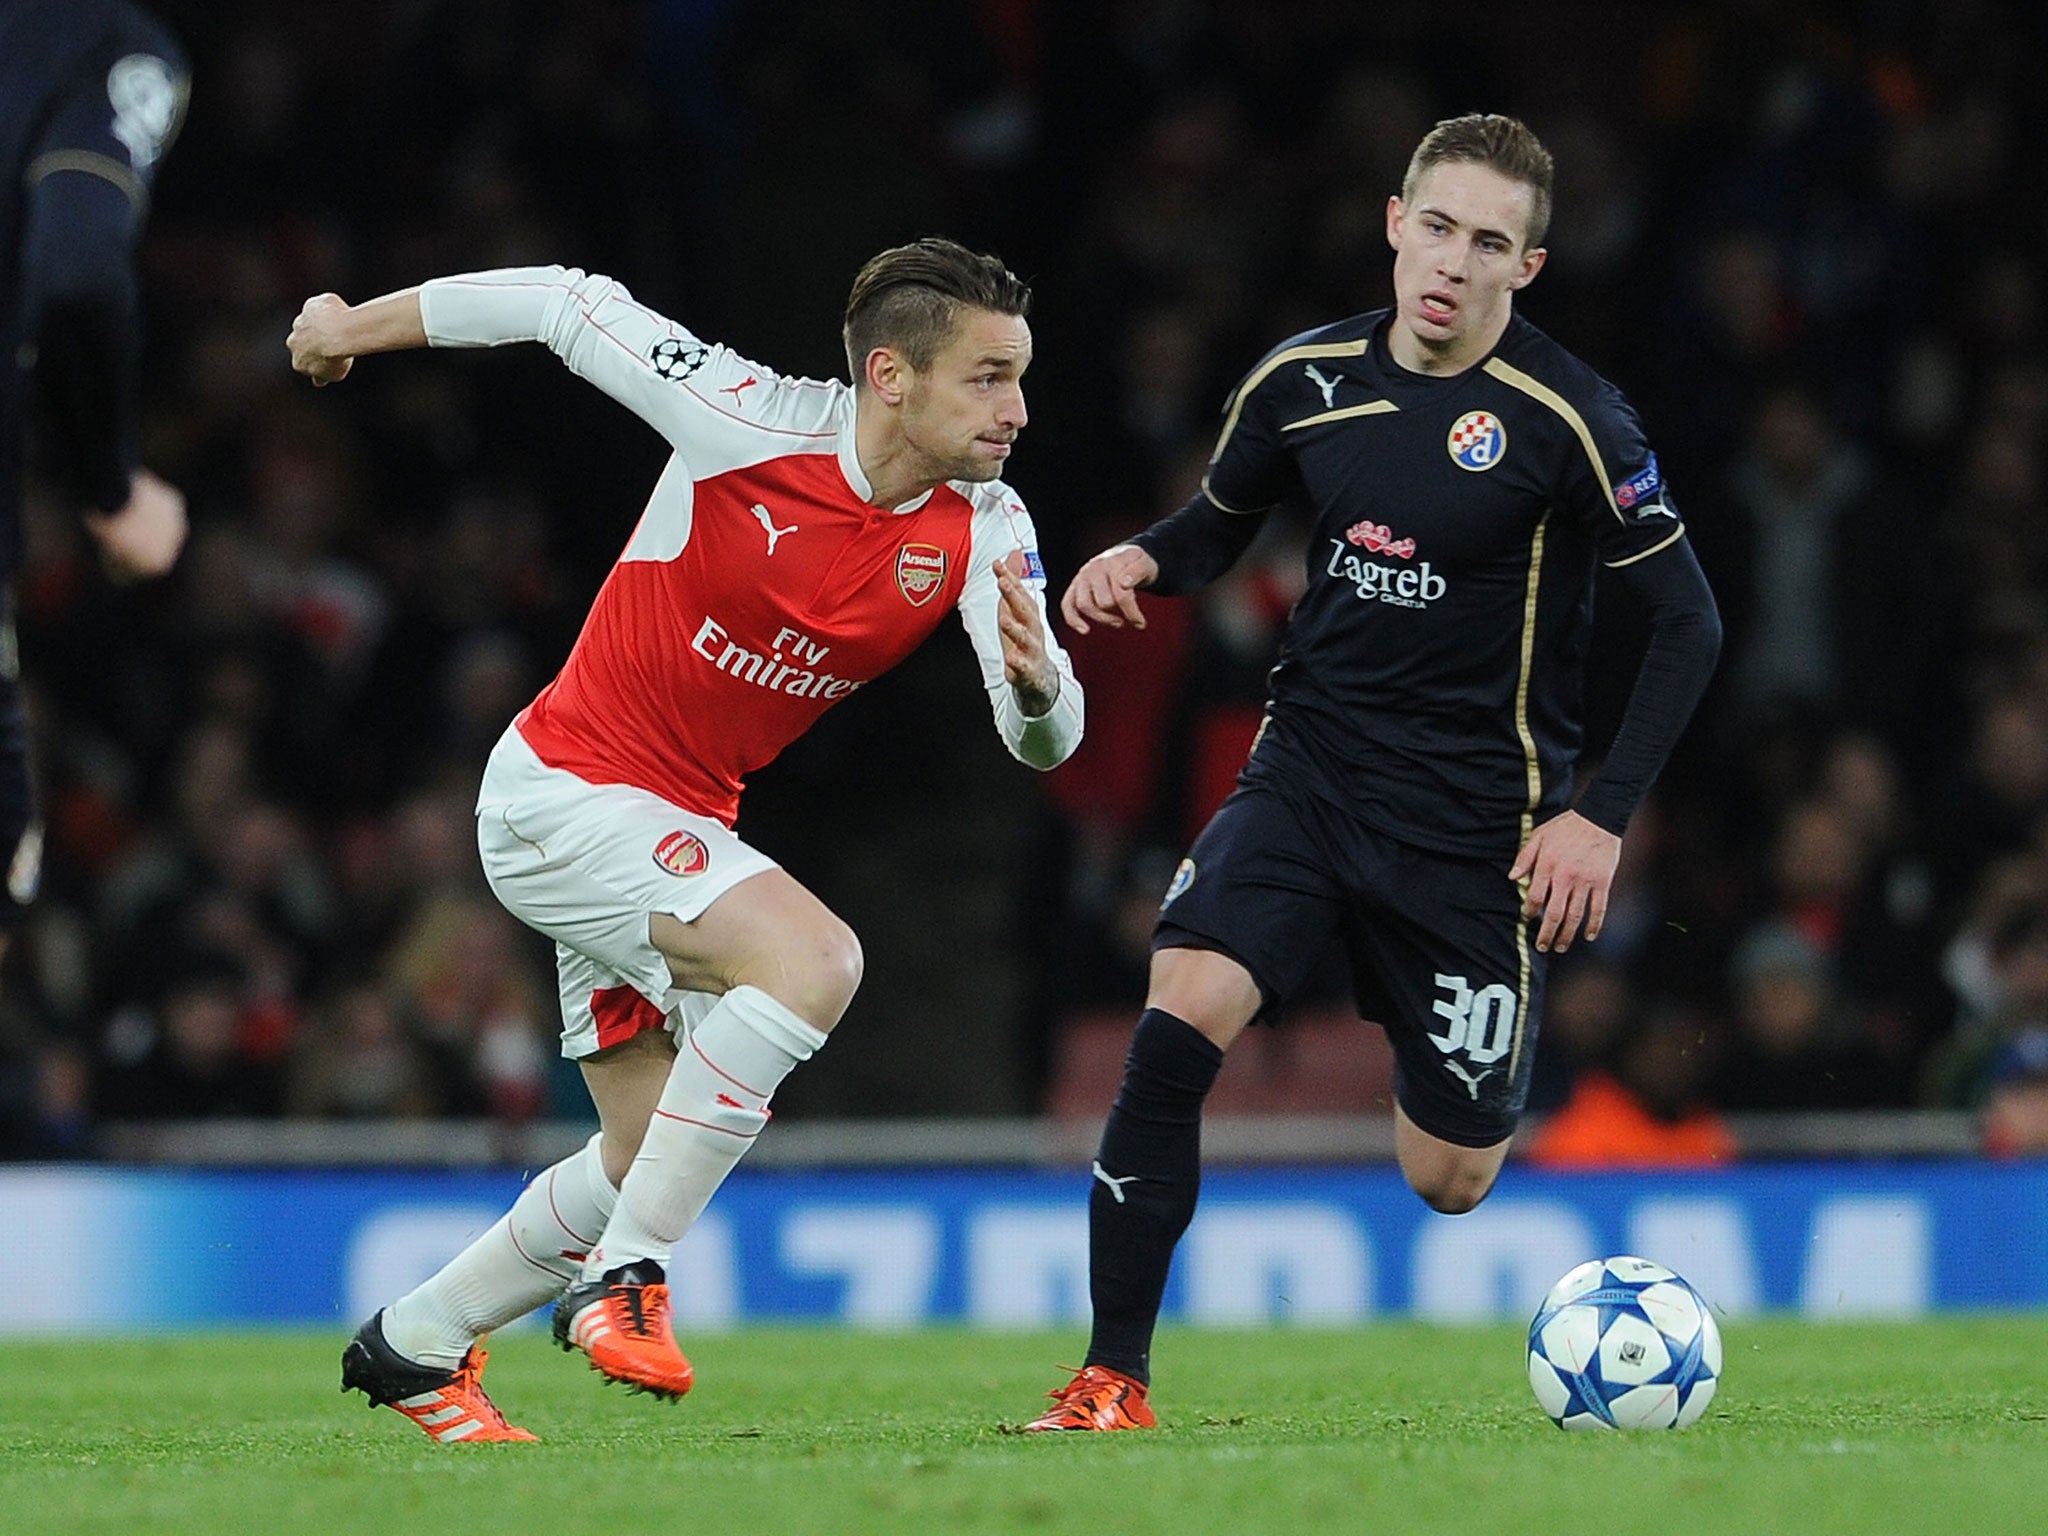 Arsenal defender Mathieu Debuchy saw a late loan bid from Manchester United rejected